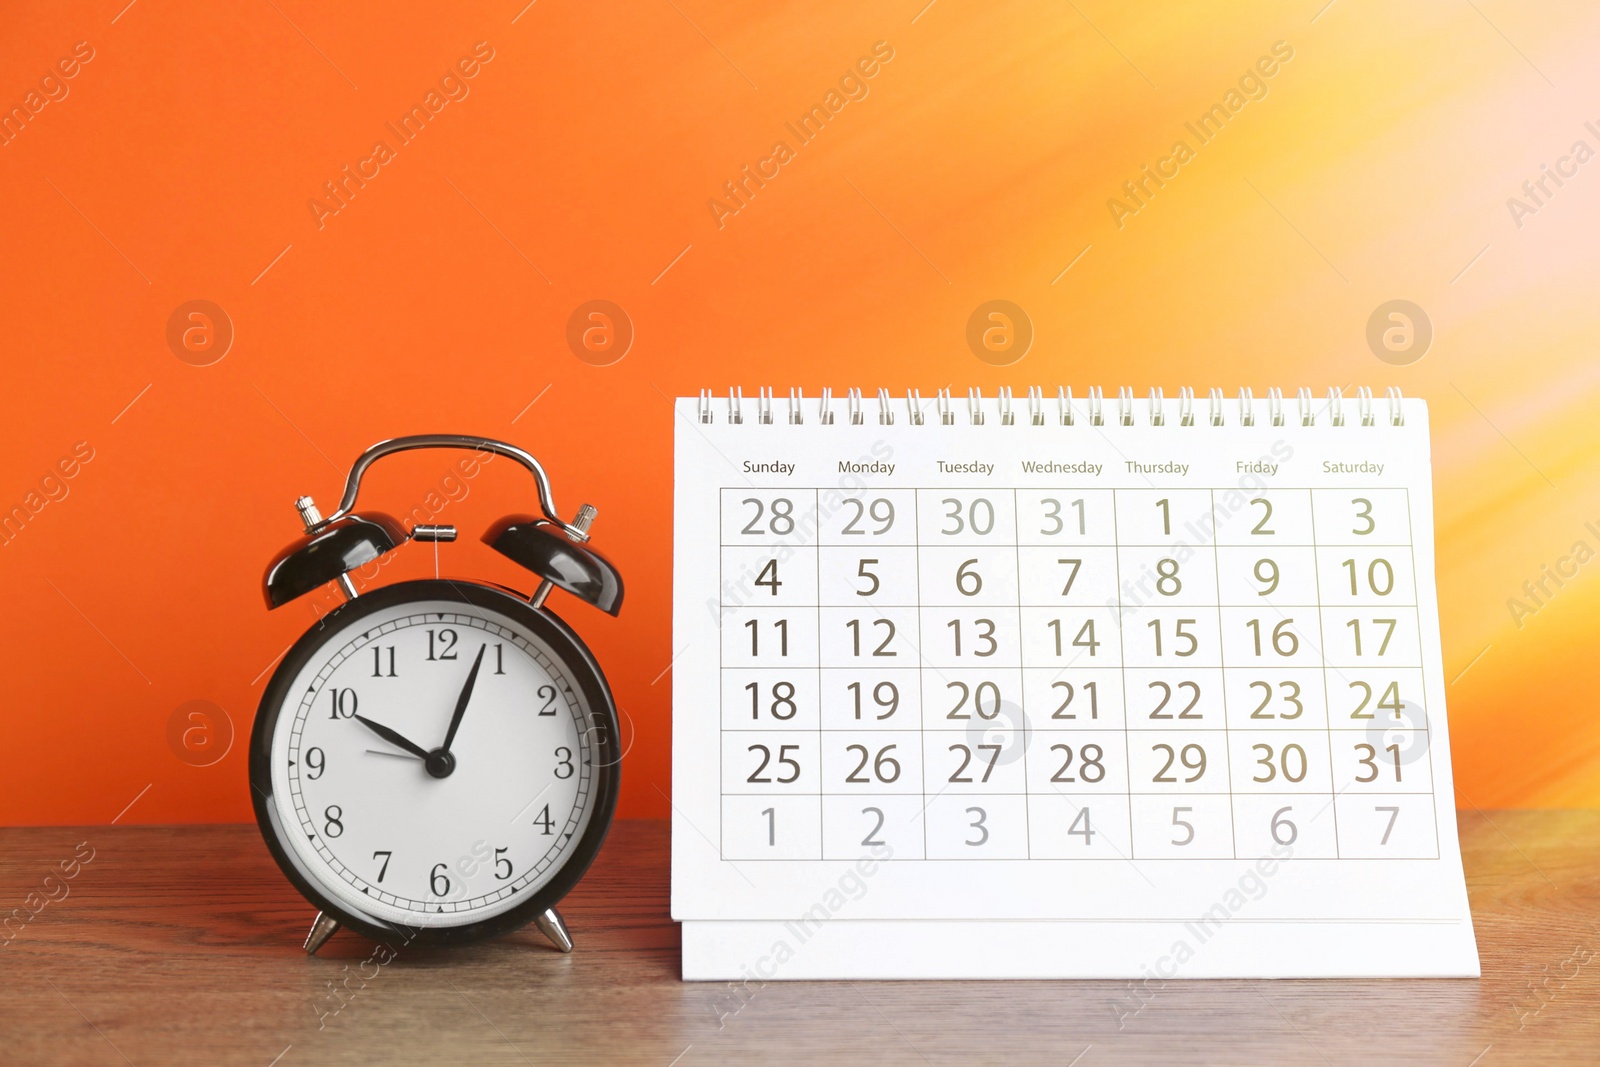 Image of Calendar and alarm clock on wooden table against orange background